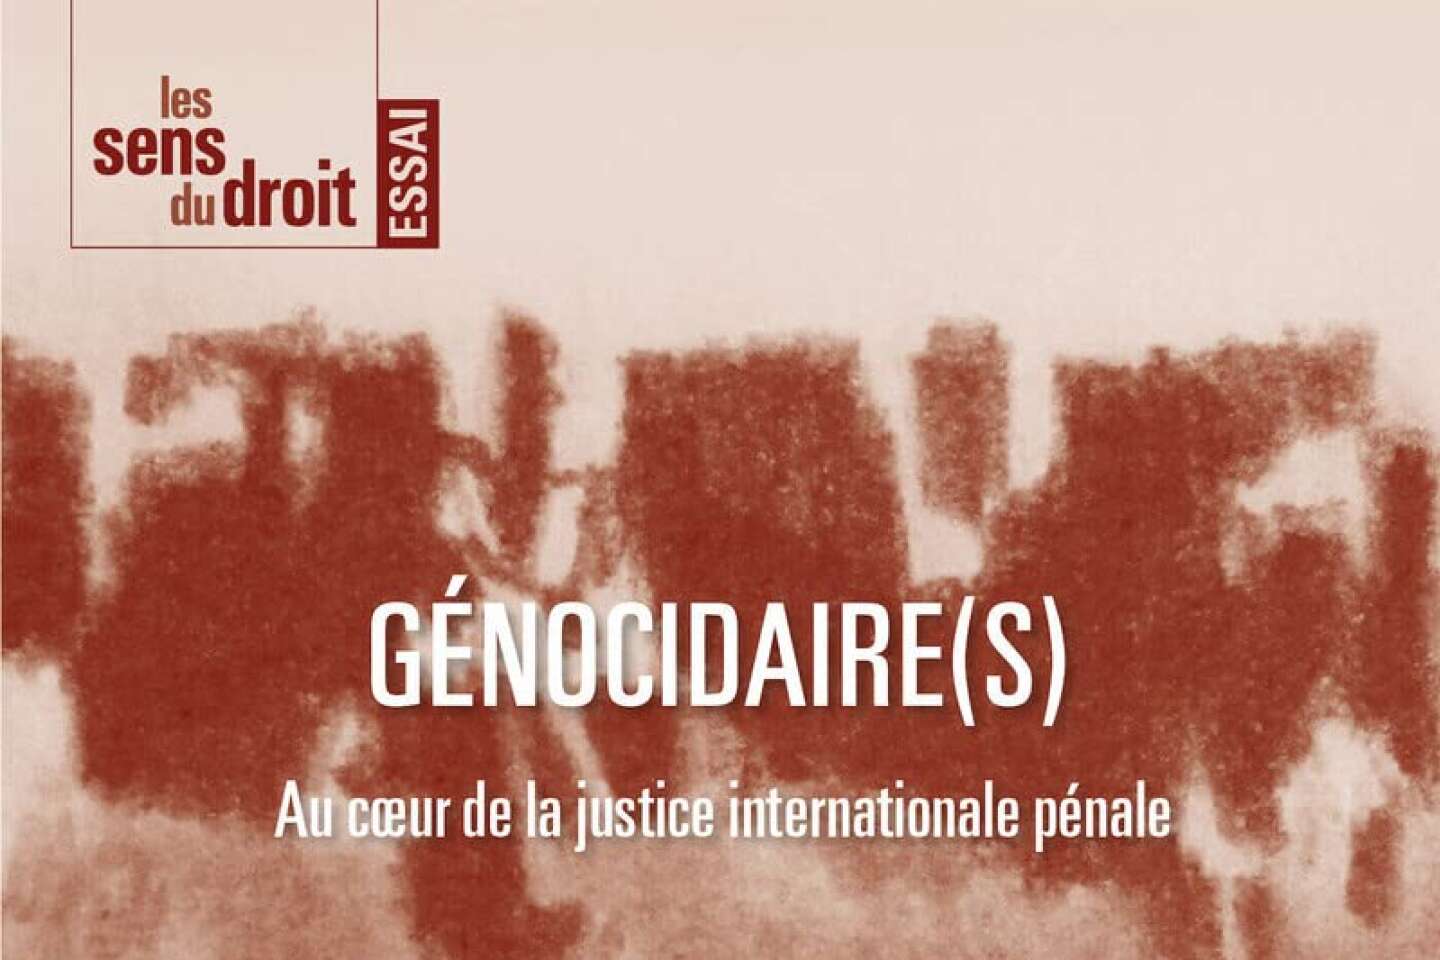 “Genocide(s)”, a book that gives the floor to the condemned